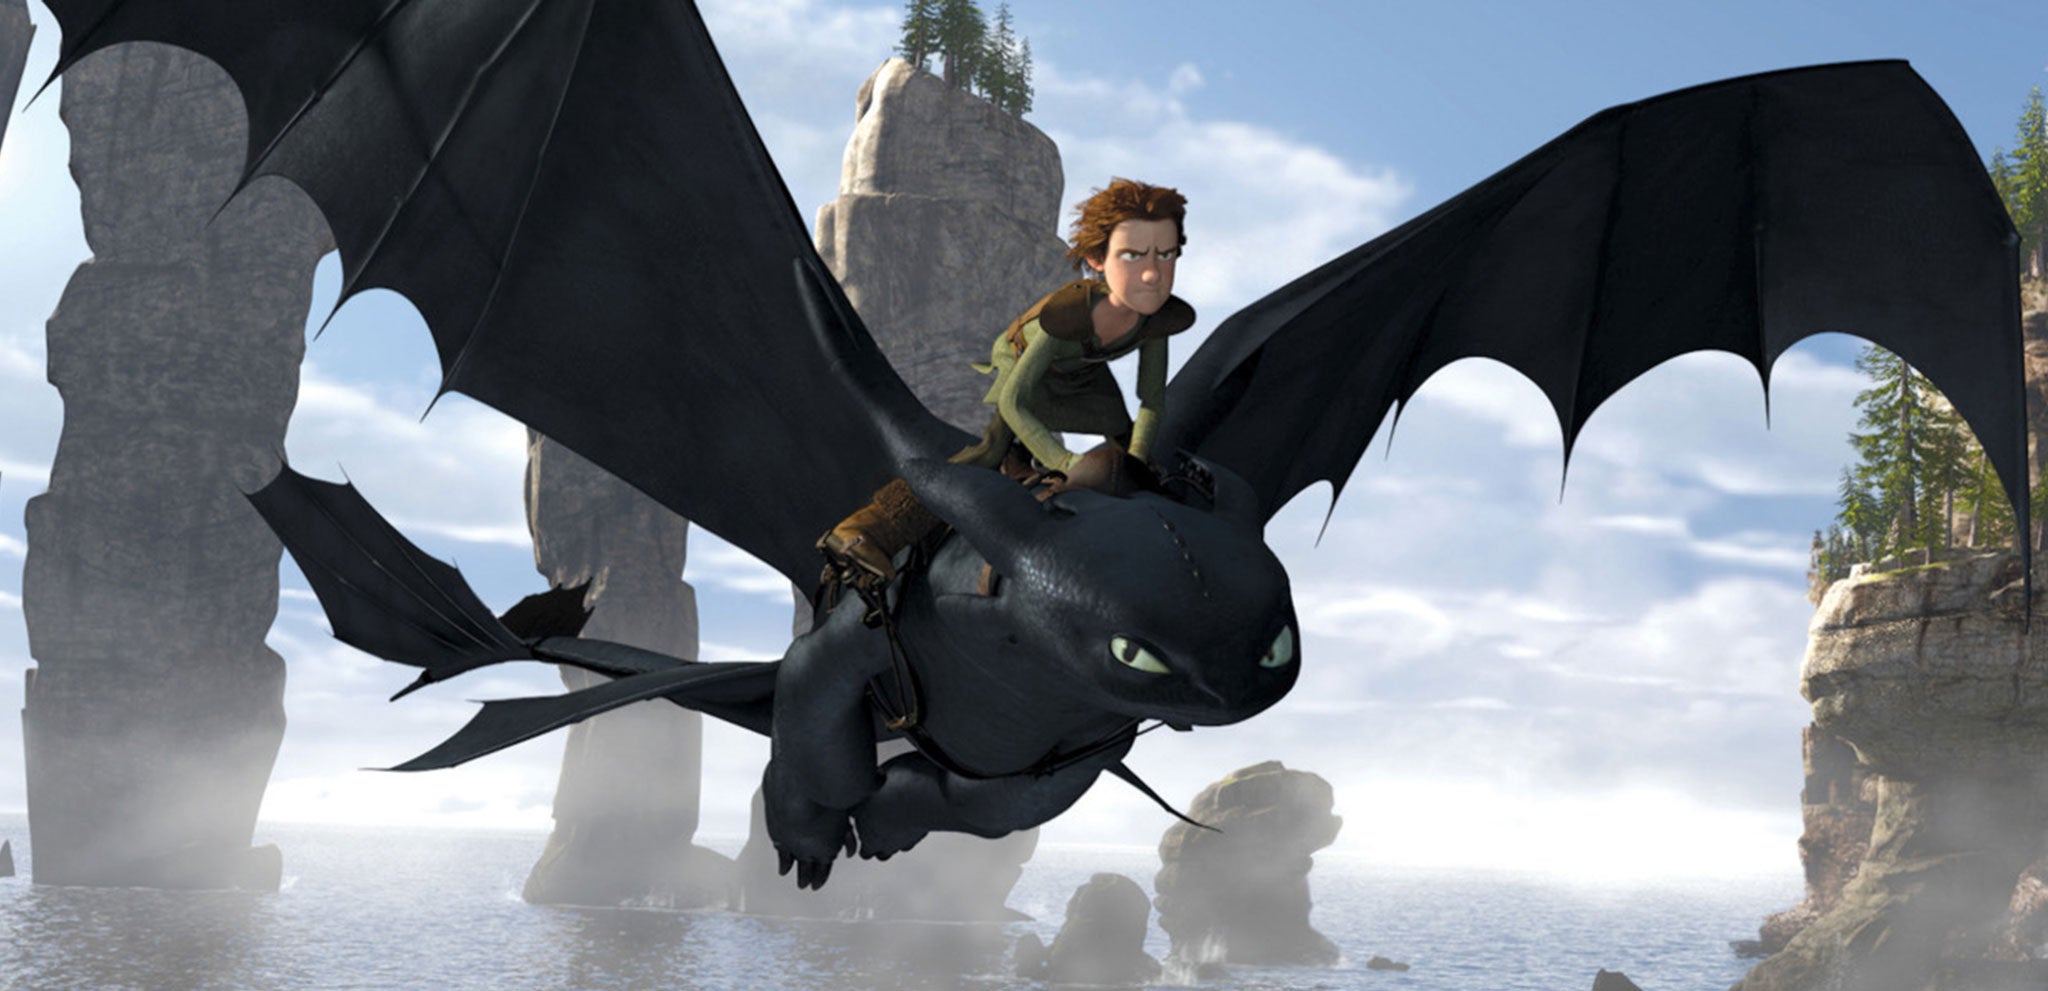 The dragon Toothless from the DreamWorks Animation film How to Train Your Dragon